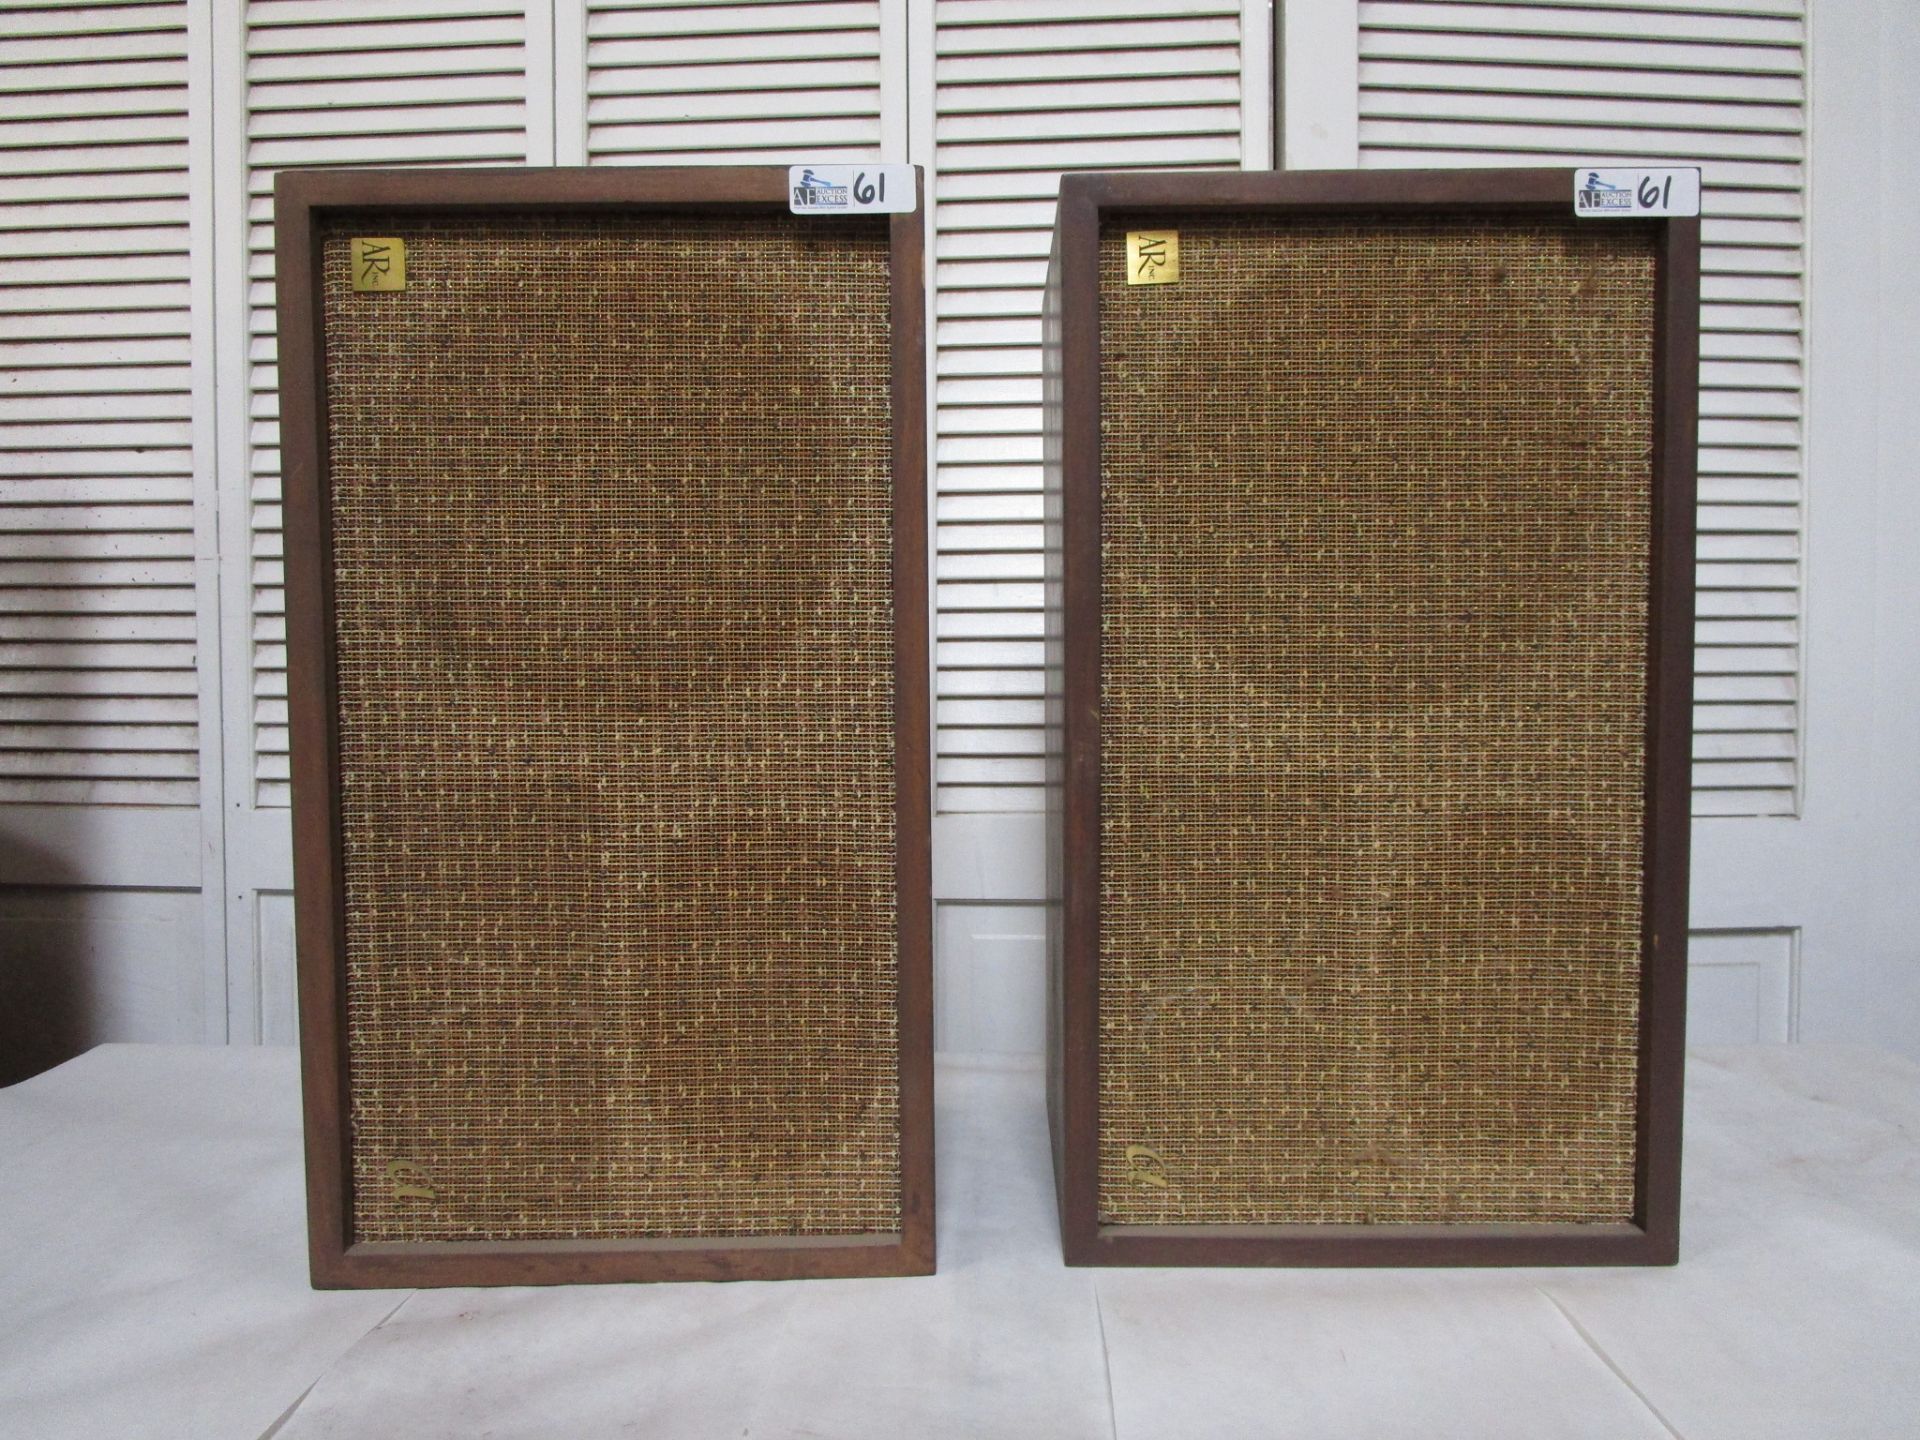 2 AR ACOUSTIC RESEARCH AR-2A SPEAKERS